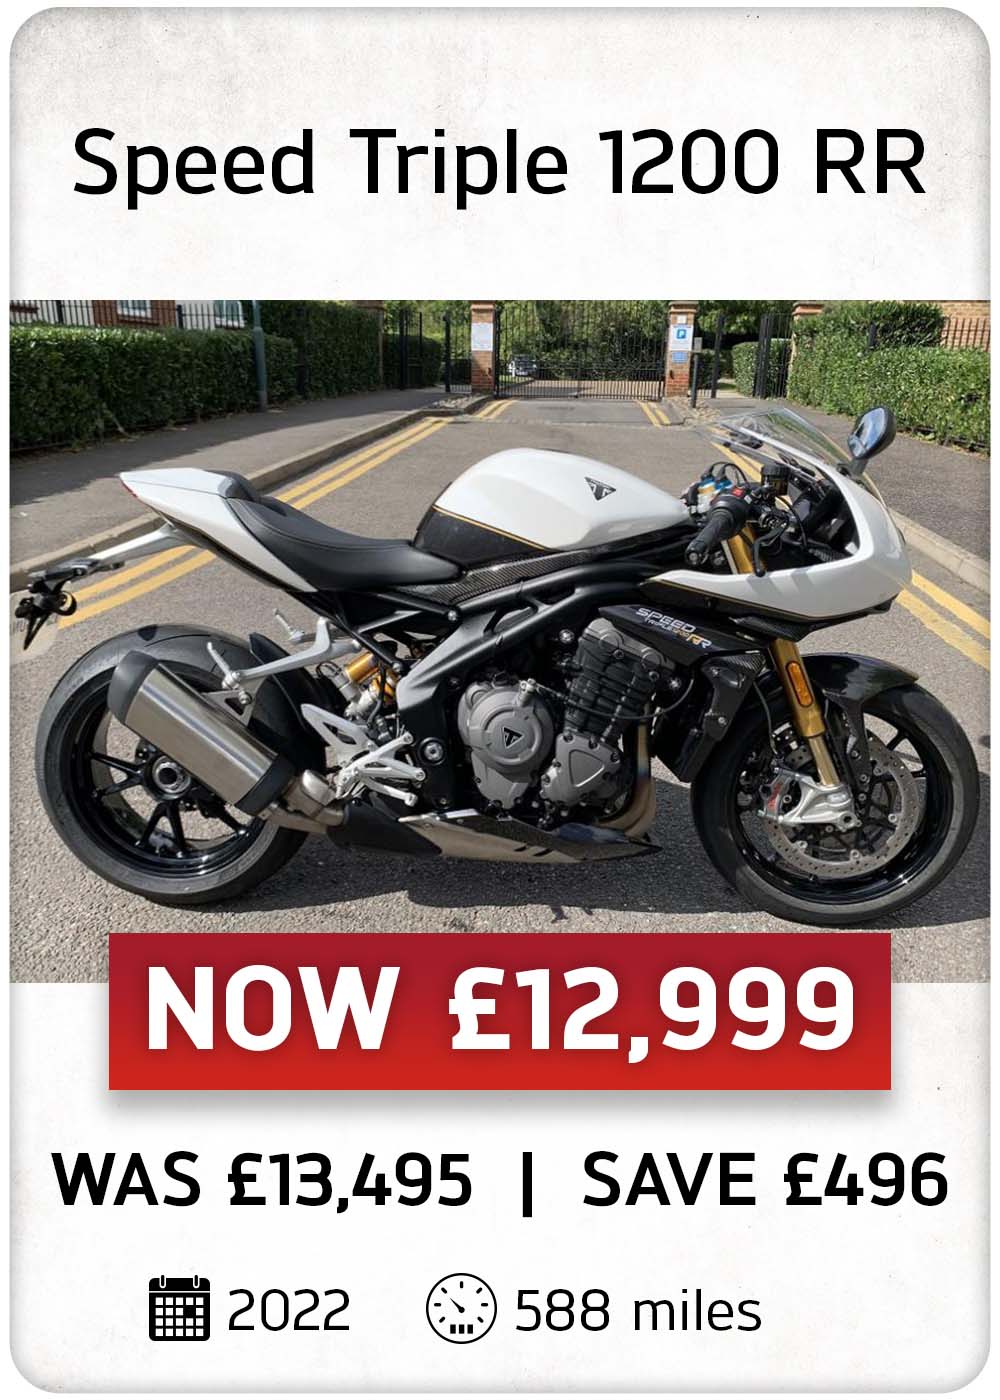 Triumph SPEED TRIPLE 1200 RR for sale in our Used Bike Specials at Laguna Motorcycles in Maidstone